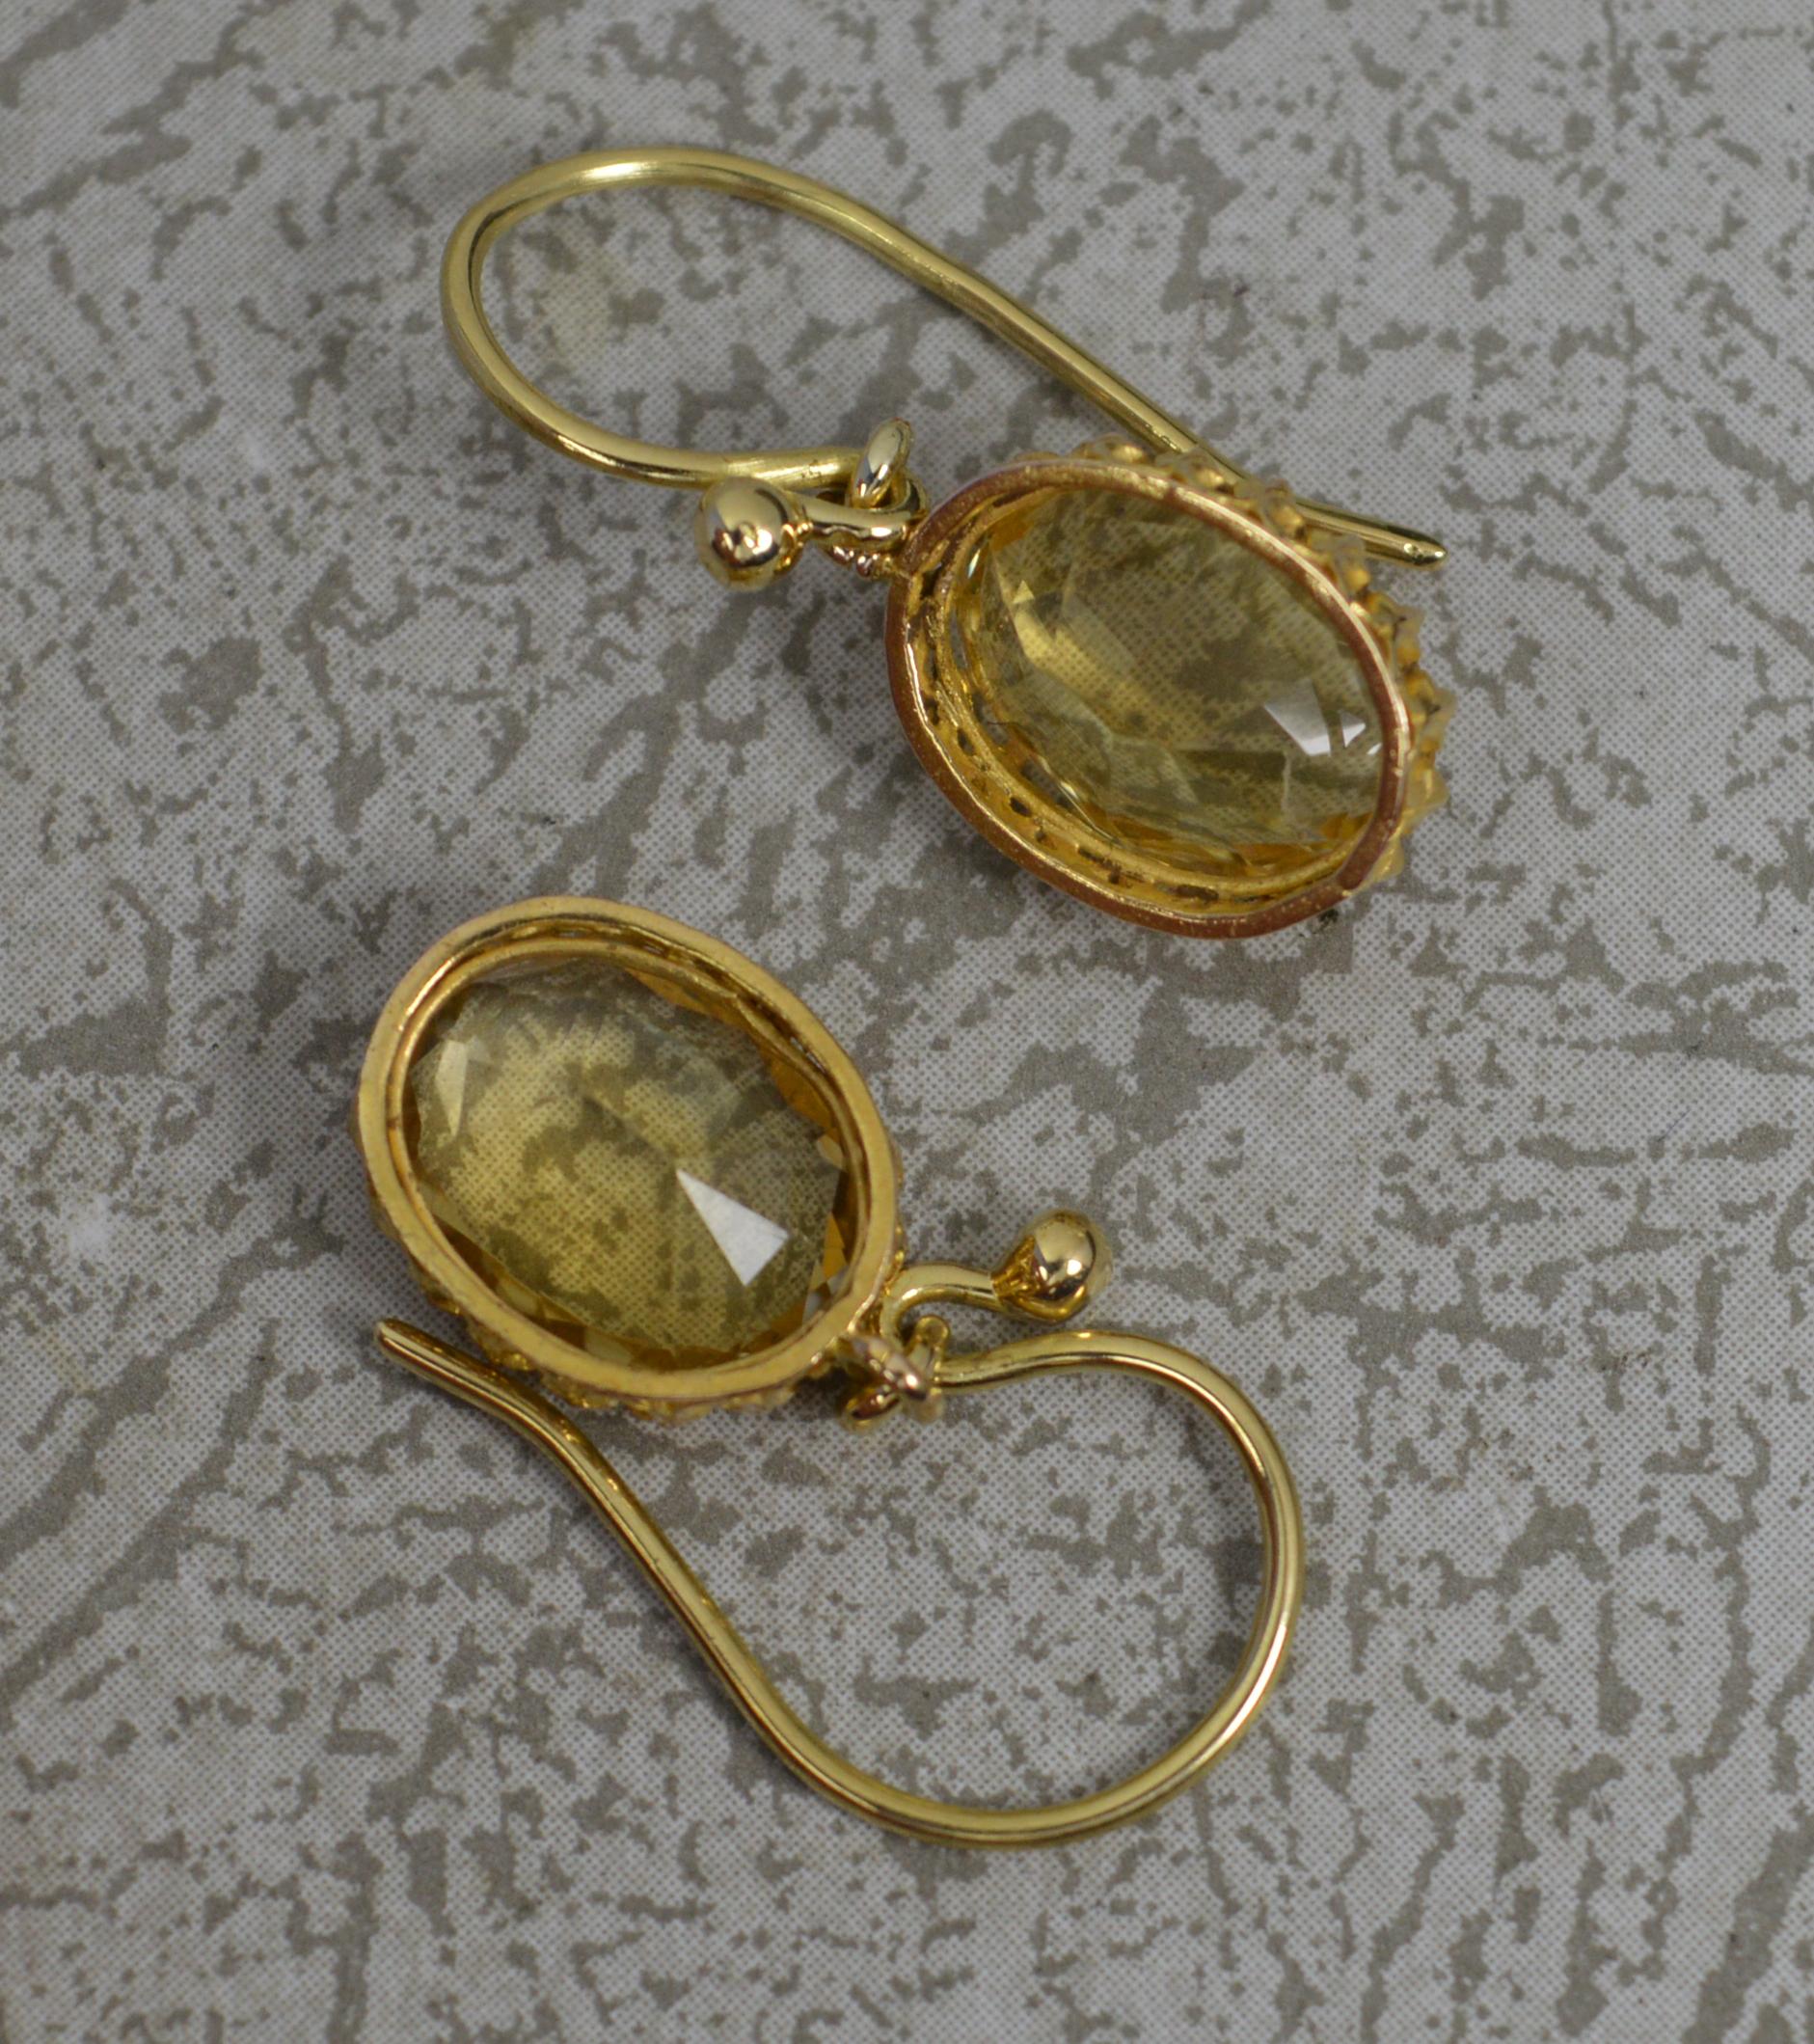 A superb pair of antique earrings, late Victorian c1880.
Solid 18 carat yellow gold multi claw settings and hook backs.
Each set with a single oval cut citrine.

CONDITION ; Very good for age. Clean and crisp. Issue free. Please view